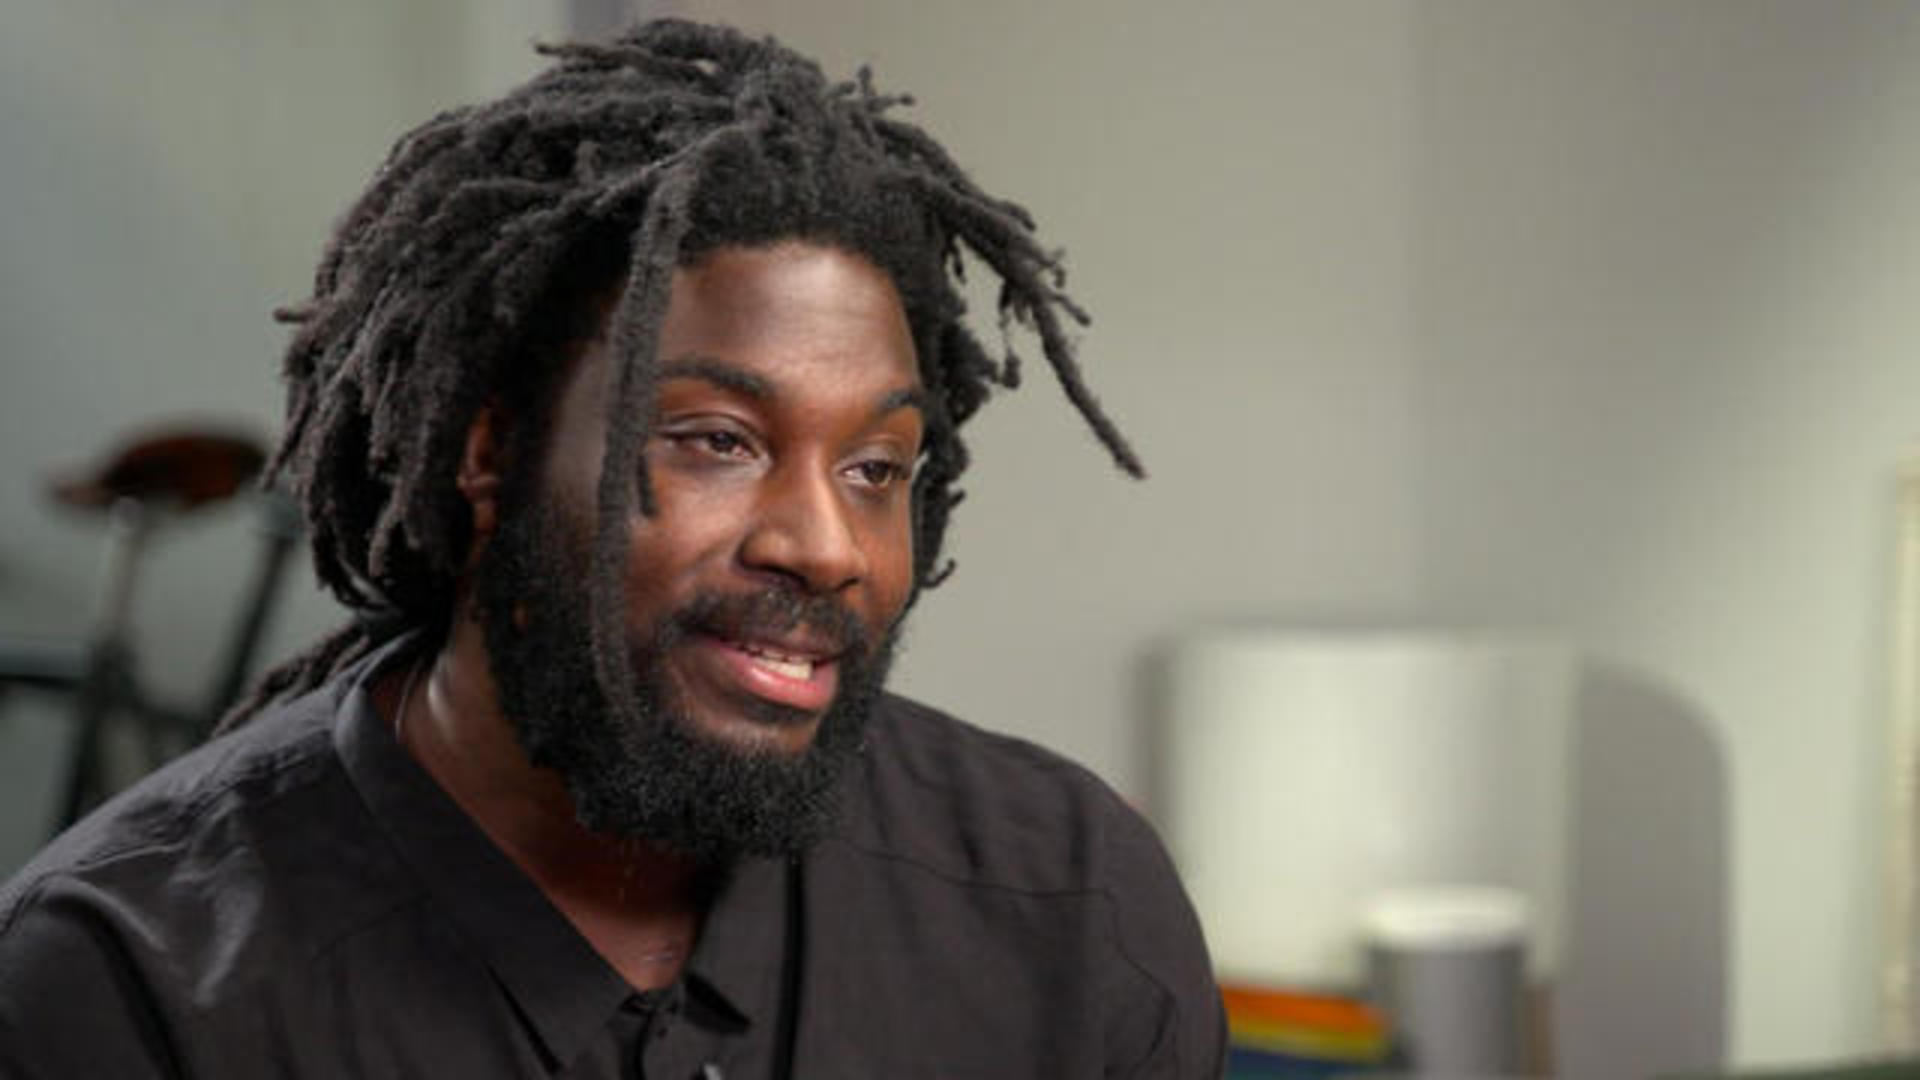 Jason Reynolds writes for youth searching for themselves as characters -  CBS News